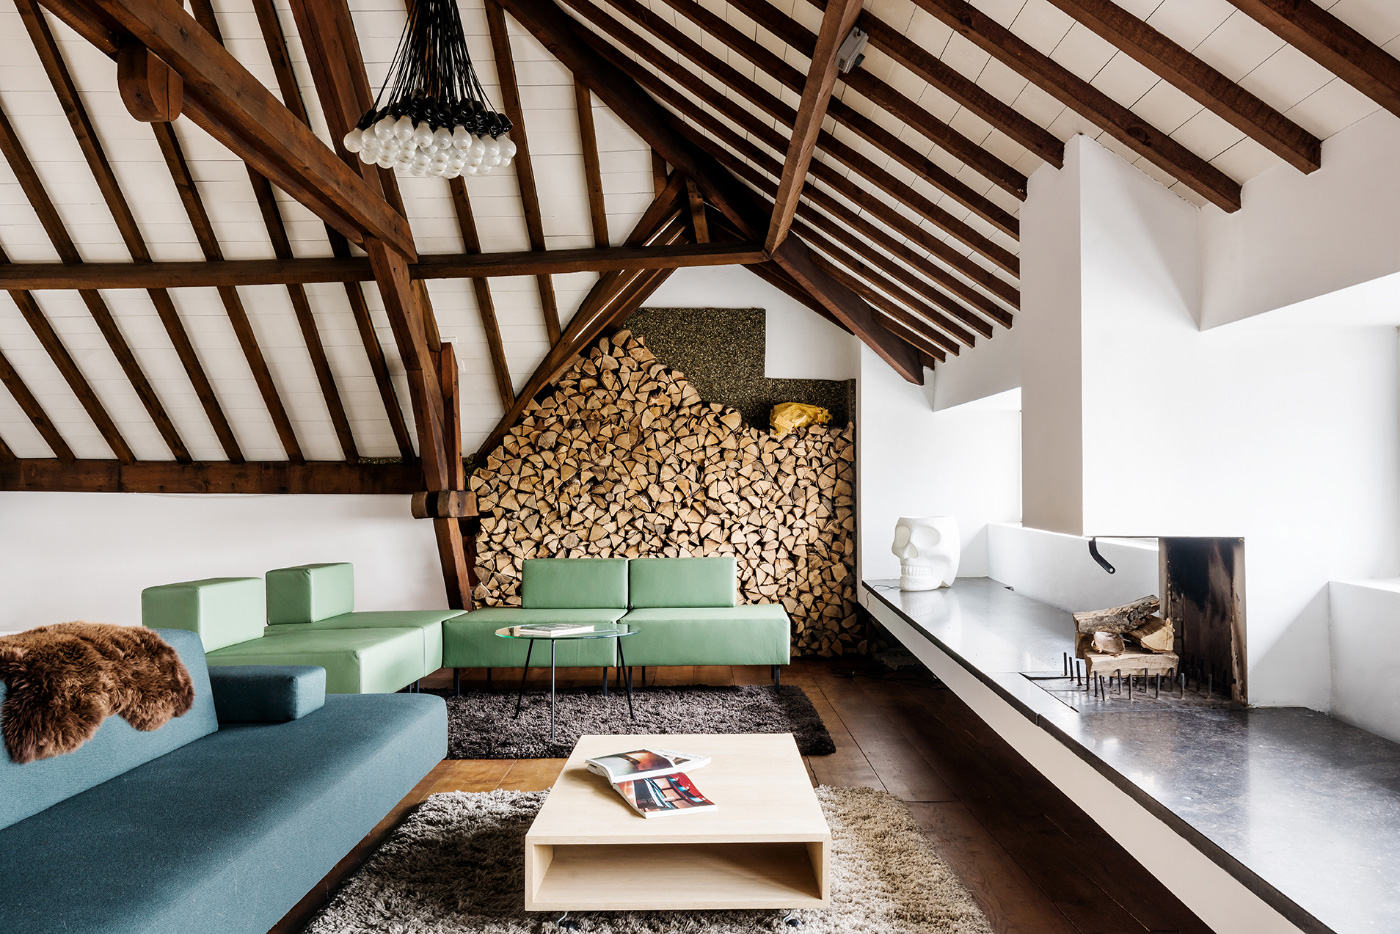 Interior of a white loft with exposed timber beams, the new home of Lensvelt